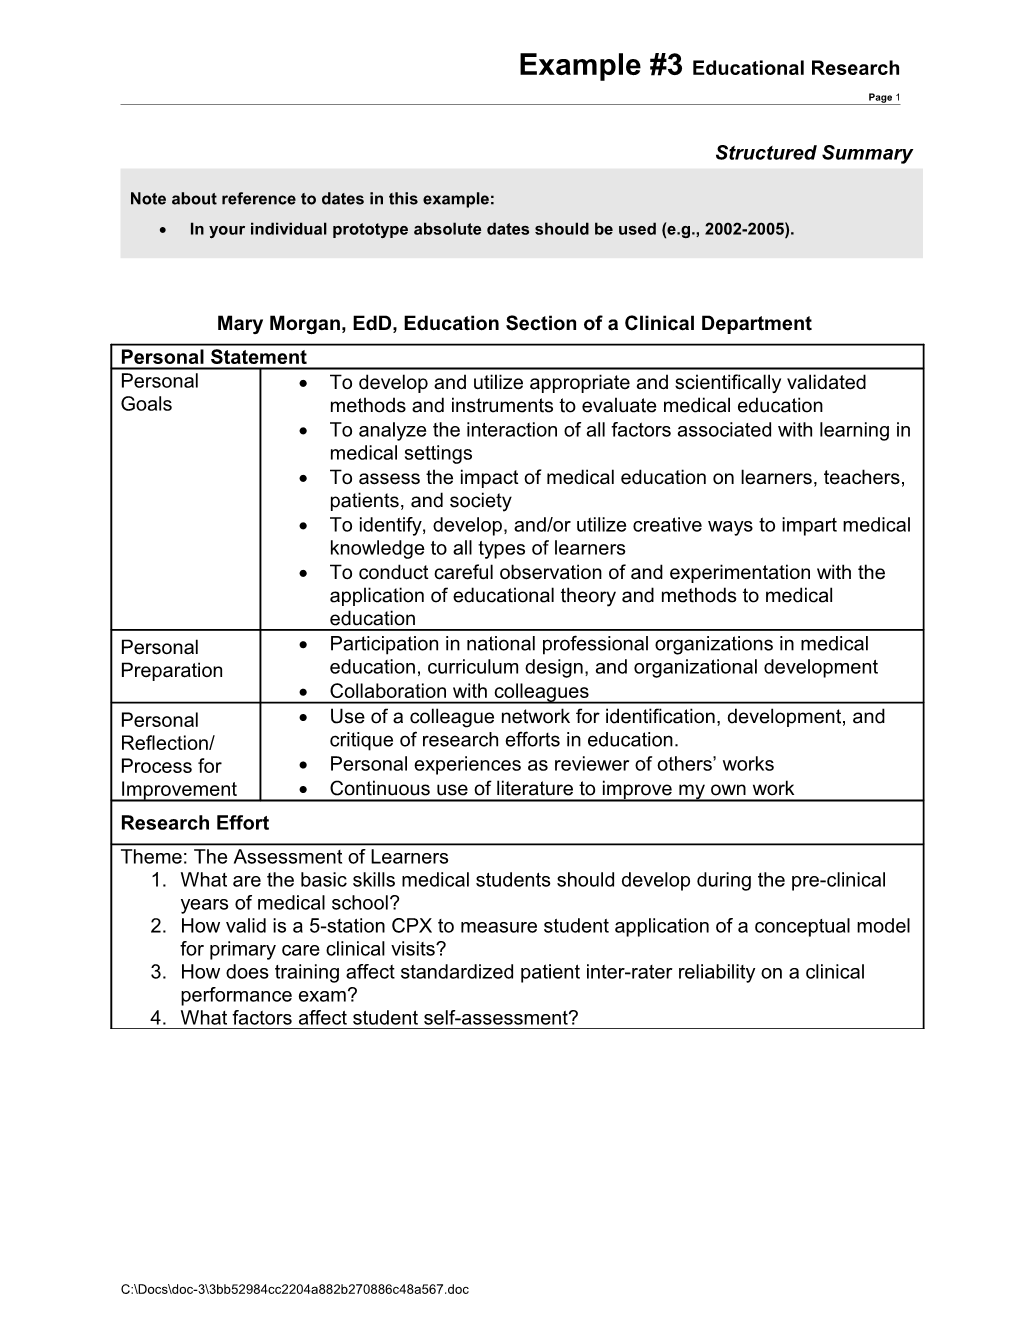 Educational Research: Structured Summary